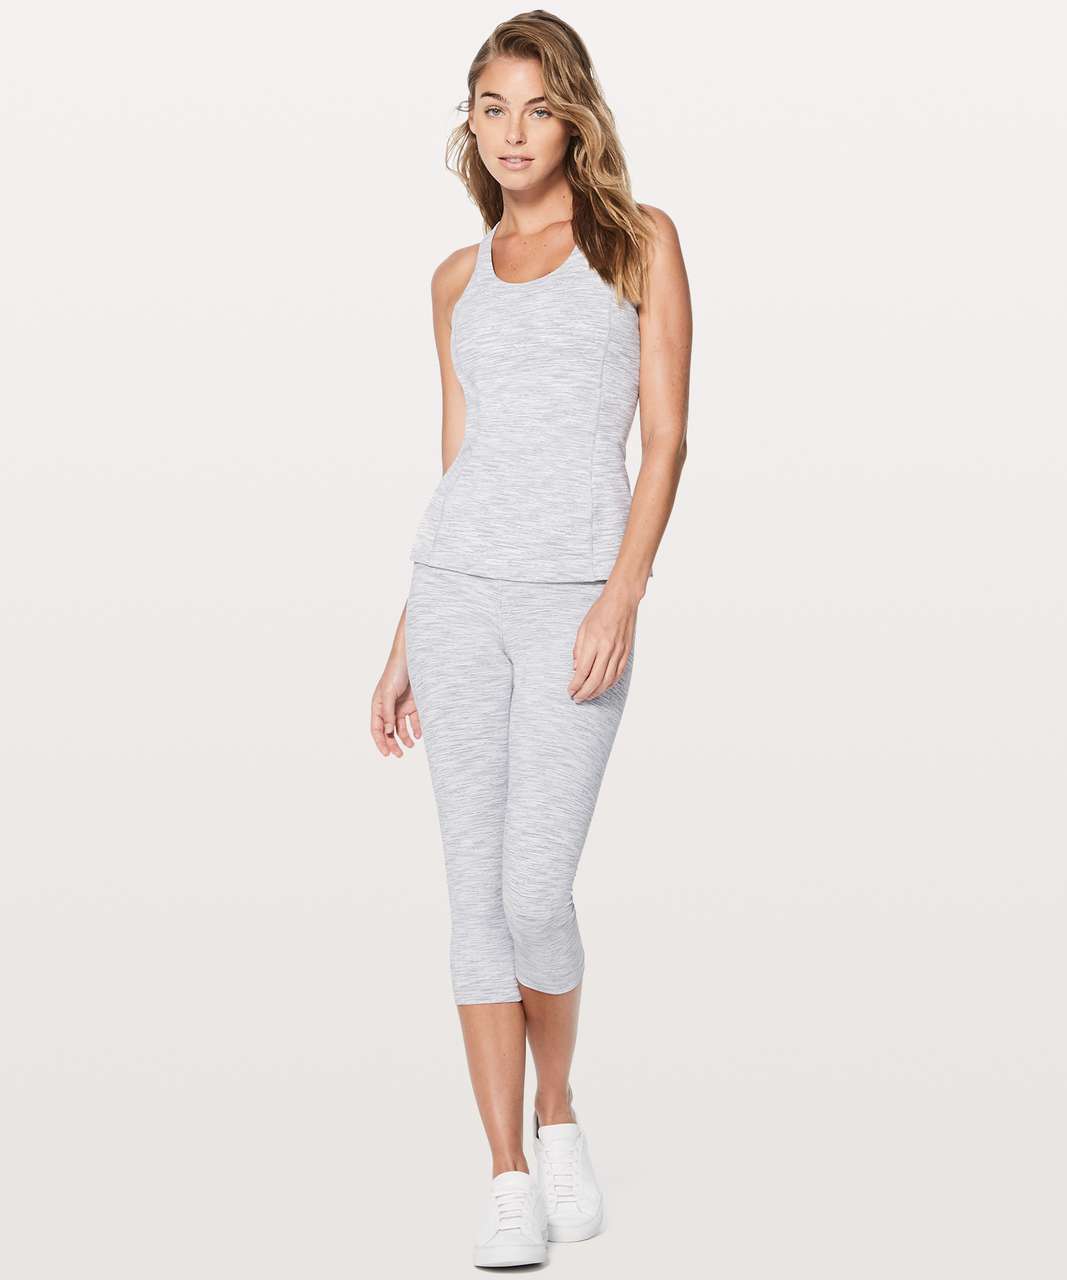 Lululemon Enhearten Tank - Wee Are From Space Ice Grey Alpine White